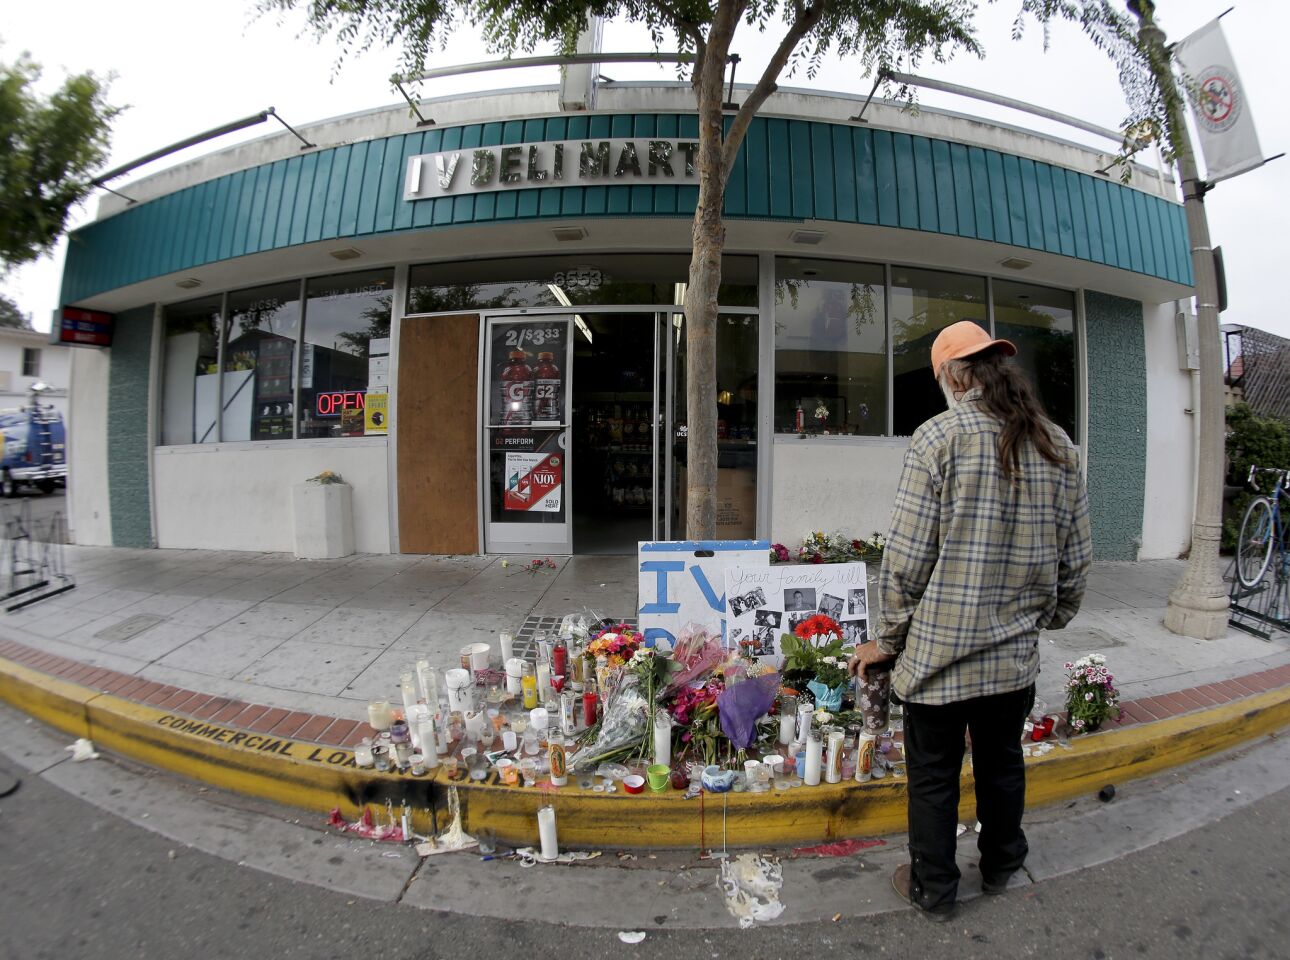 A passerby pays his respects at a makeshift memorial in front of the IV Deli Mart.